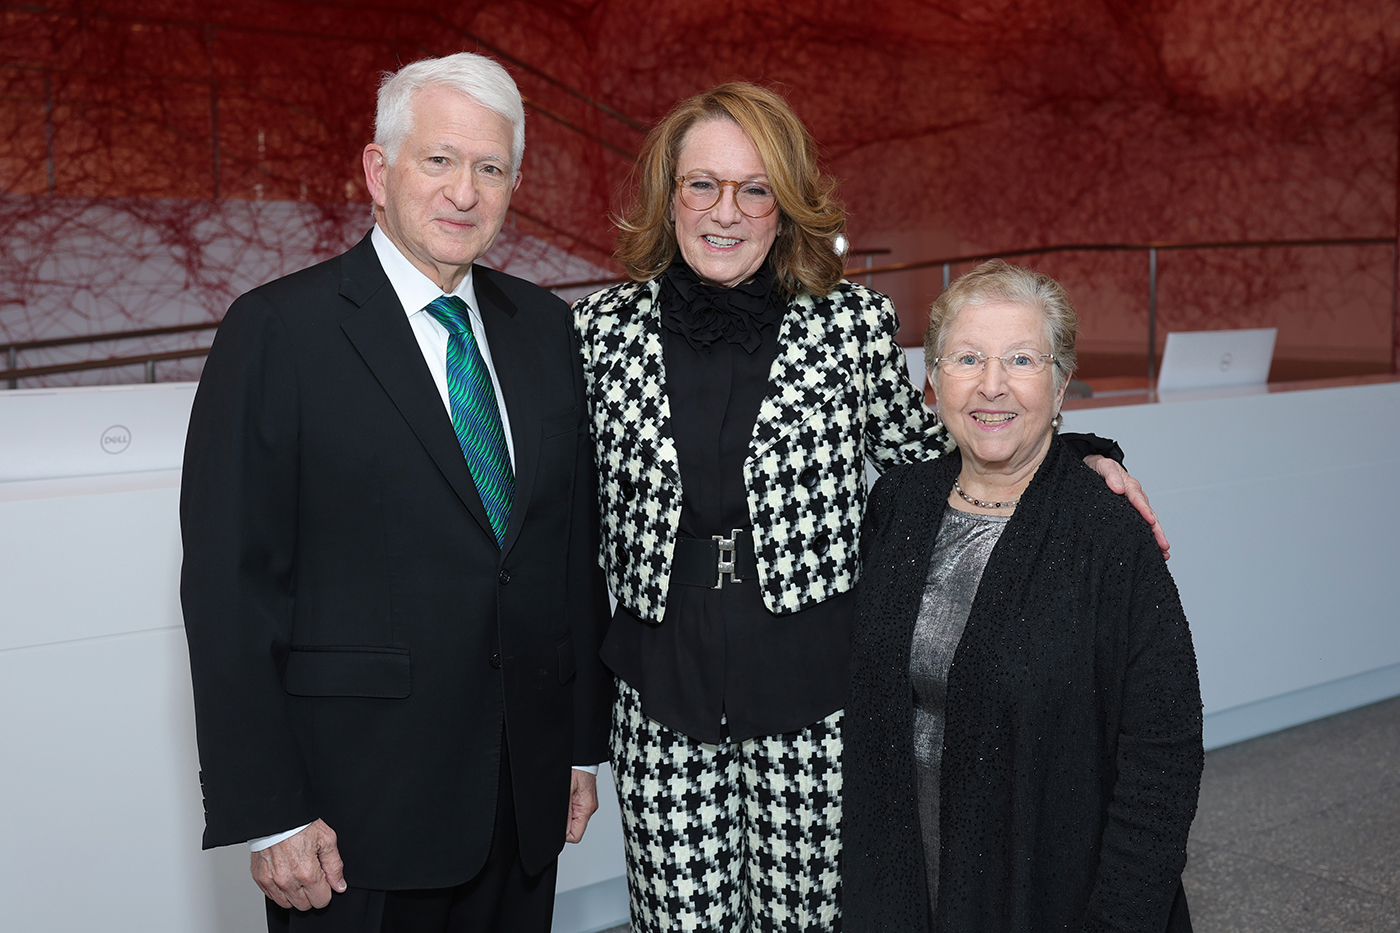 Chancellor Block and Mrs. Block flank a blonde woman wearing a houndstooth suit in the entryway of the Hammer Museum.